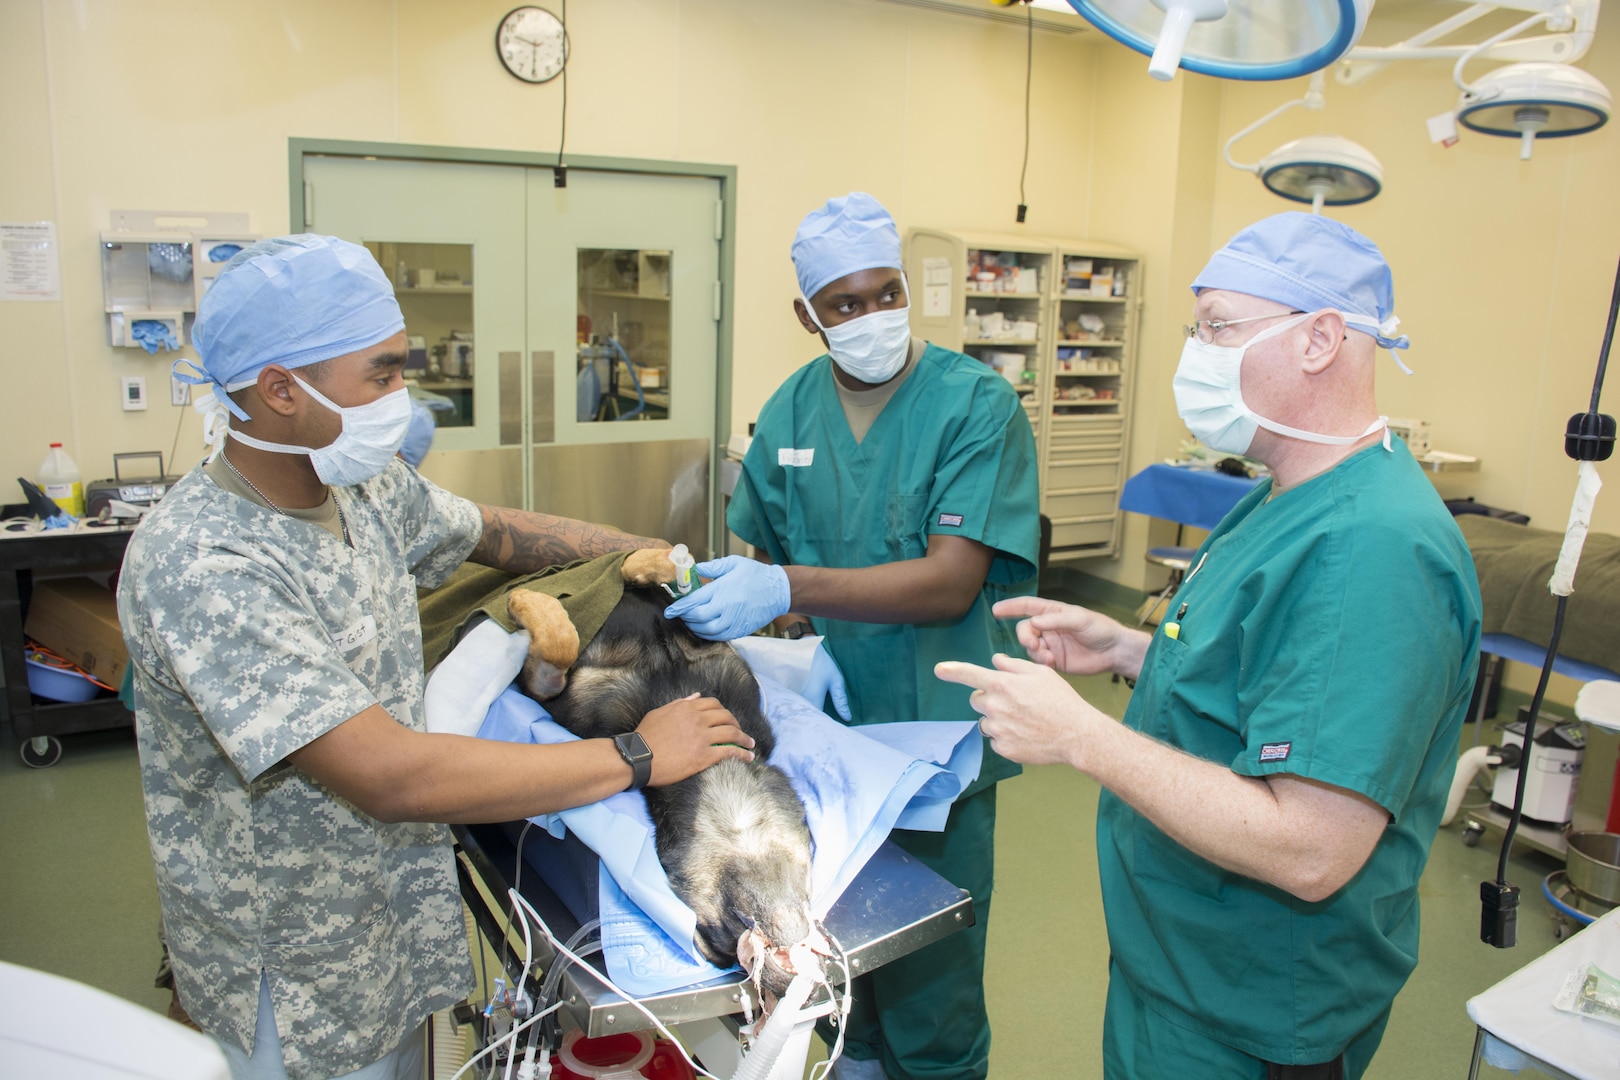 Lt. Col. Shawn Owens, Chief Animal Health Branch (right) instructs 68T students Pvt. Miles Gist (left) and Pvt. Audie Farley (center) on preparing a U.S. Customs and Border Patrol working dog for surgery.